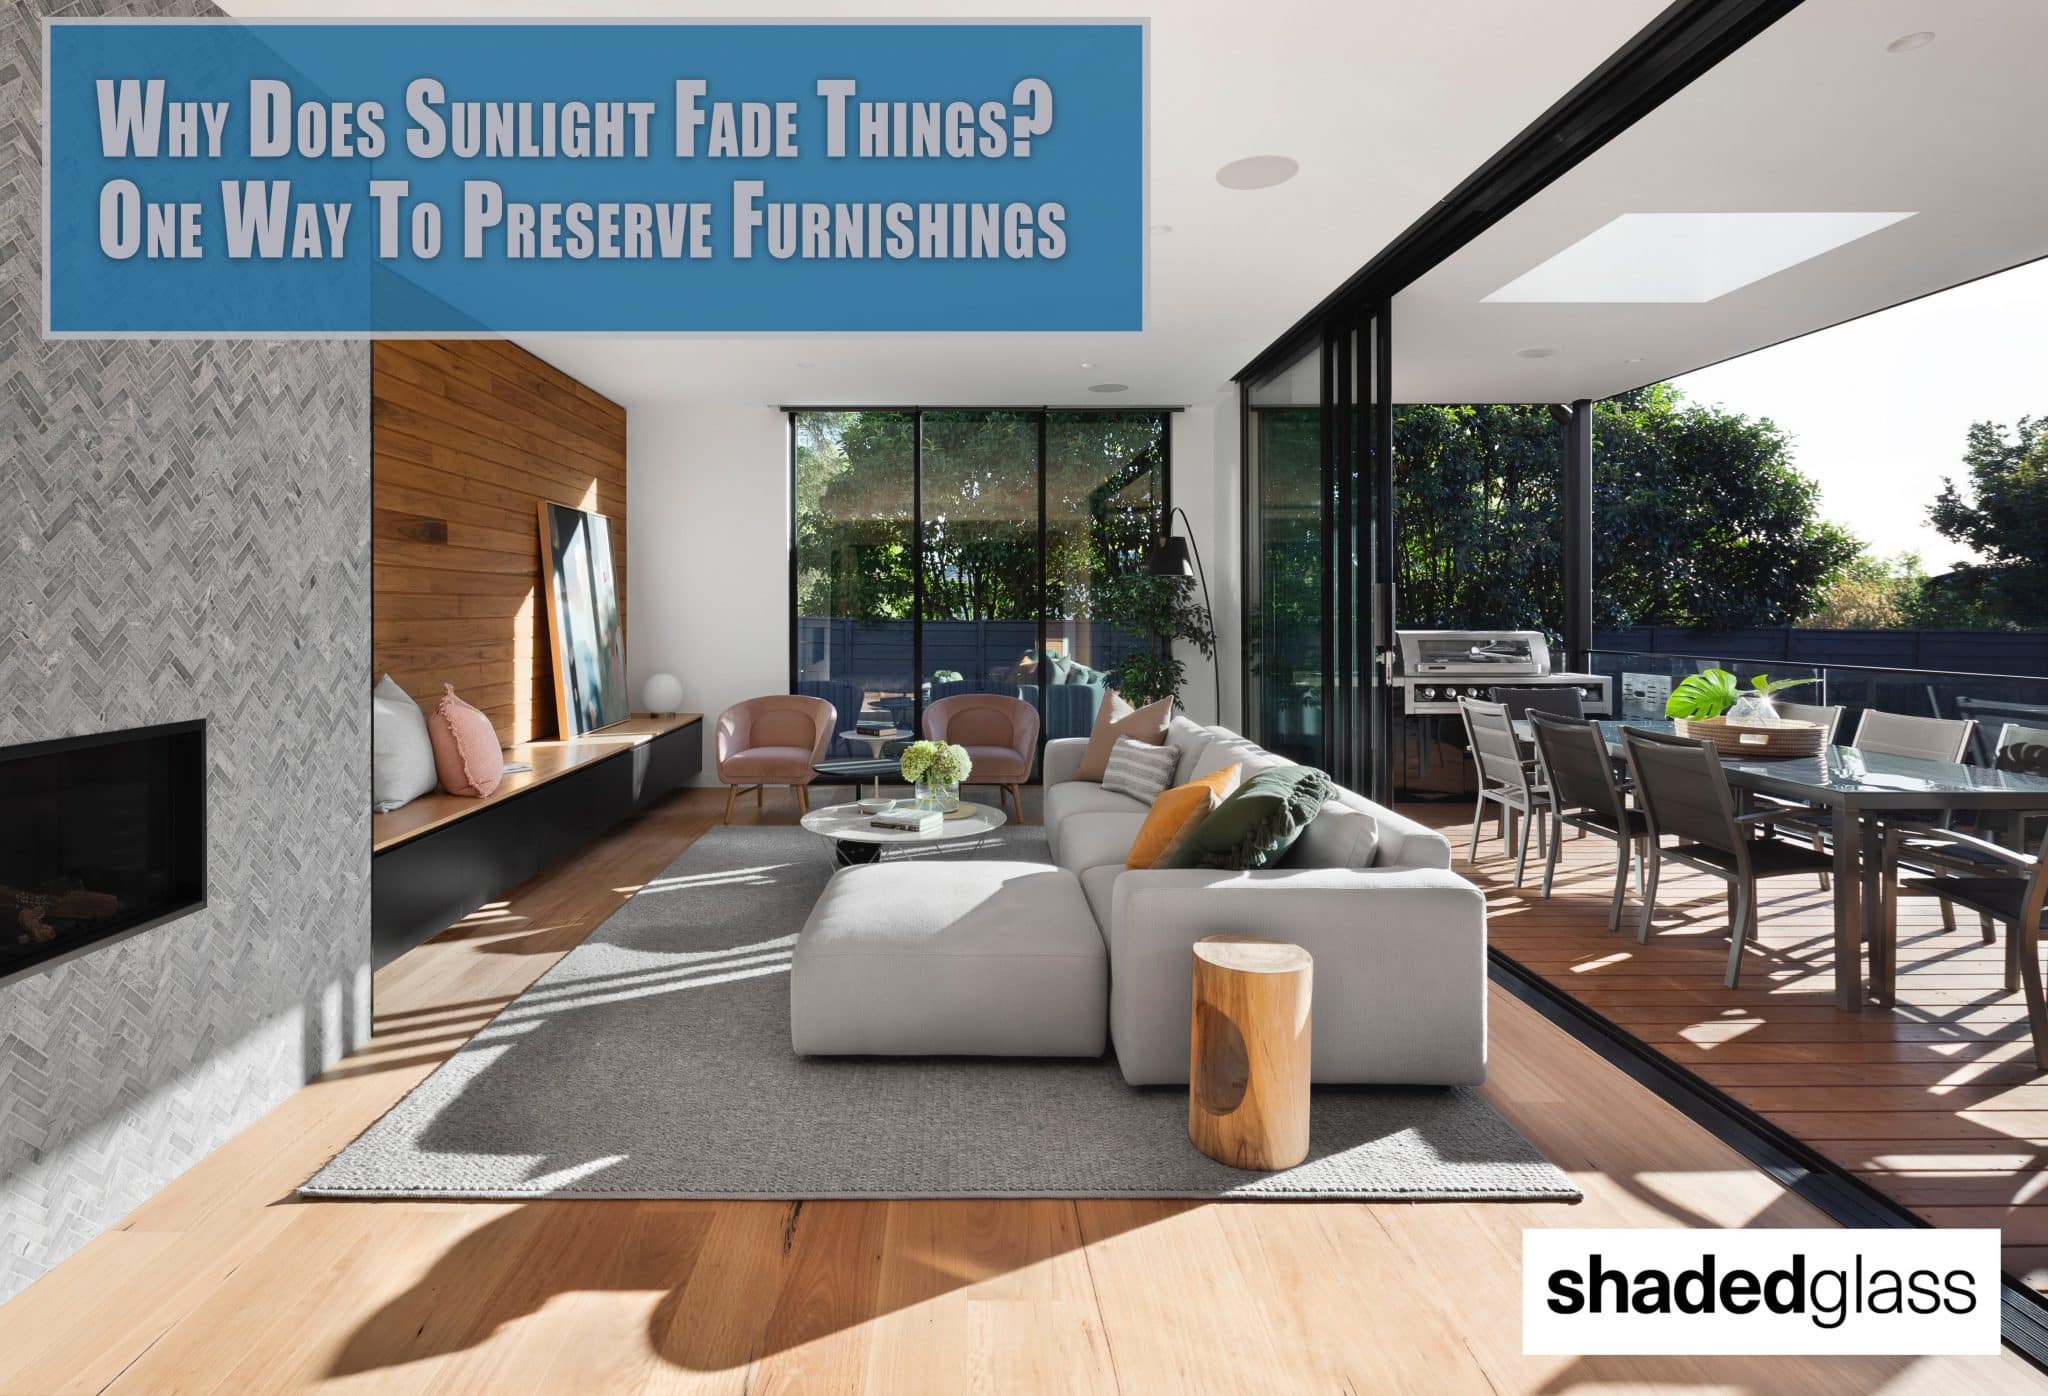 Why Does Sunlight Fade Things? 1 Way To Preserve Furnishings.